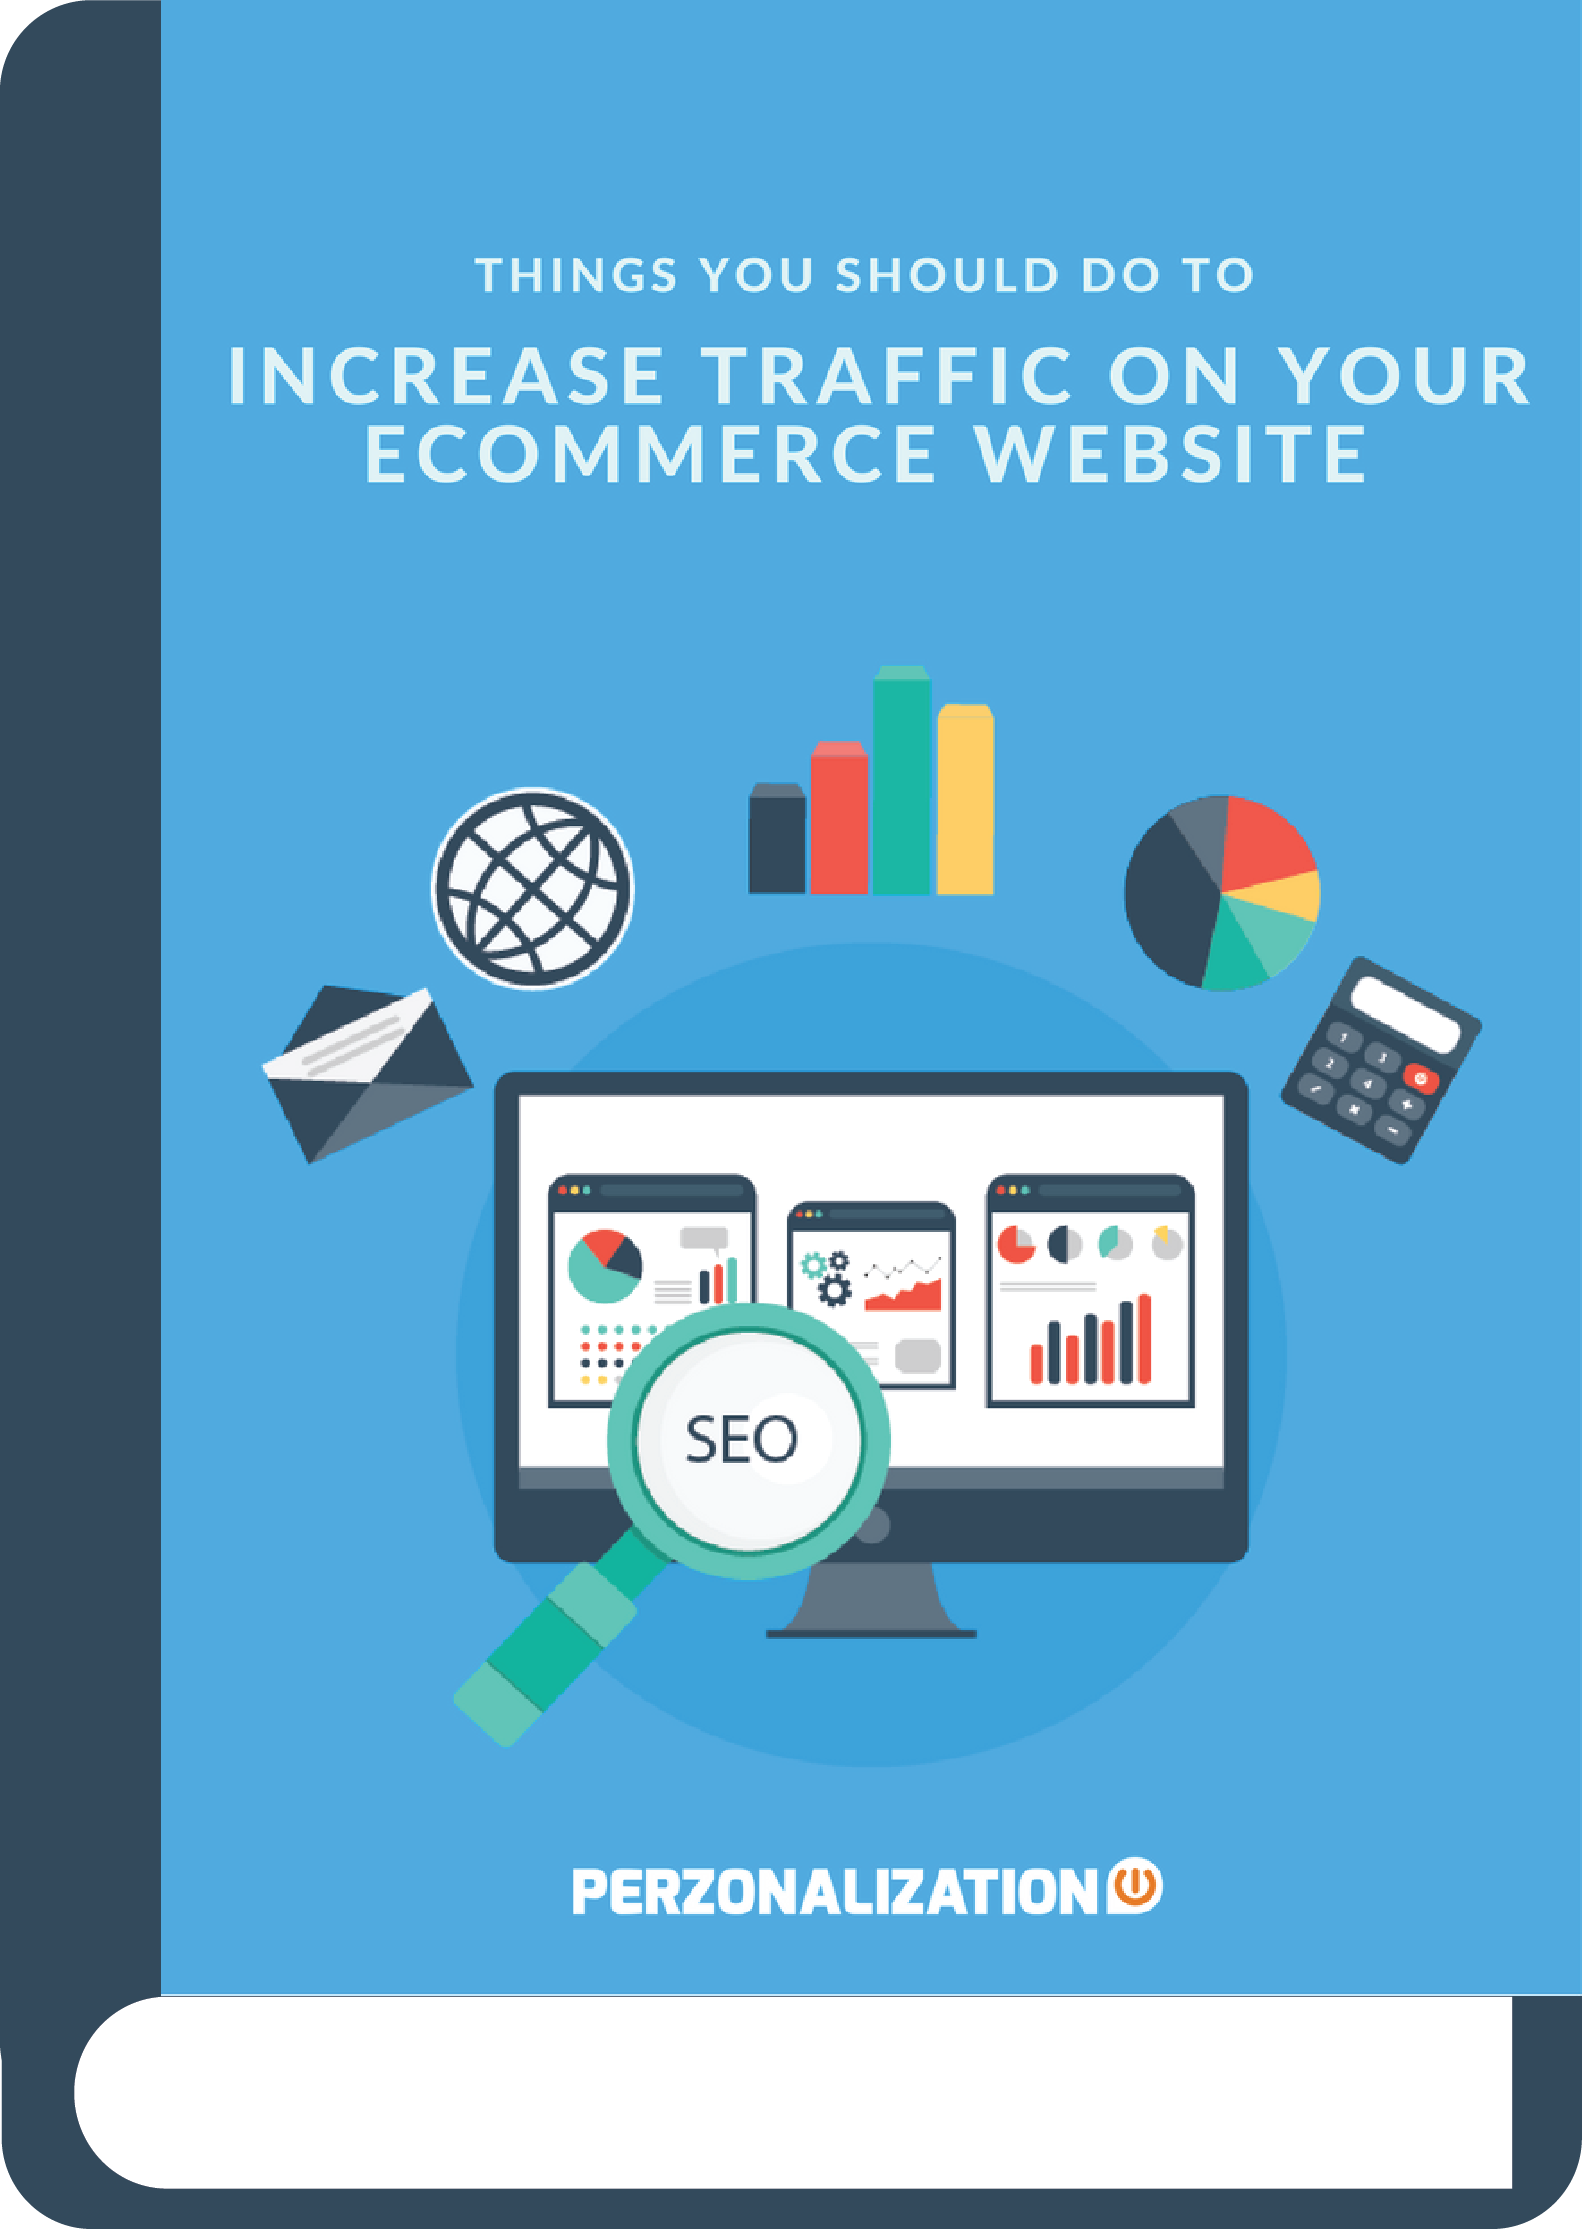 In this article we have listed some tried and tested ways to increase traffic which when done properly yields amazing results.